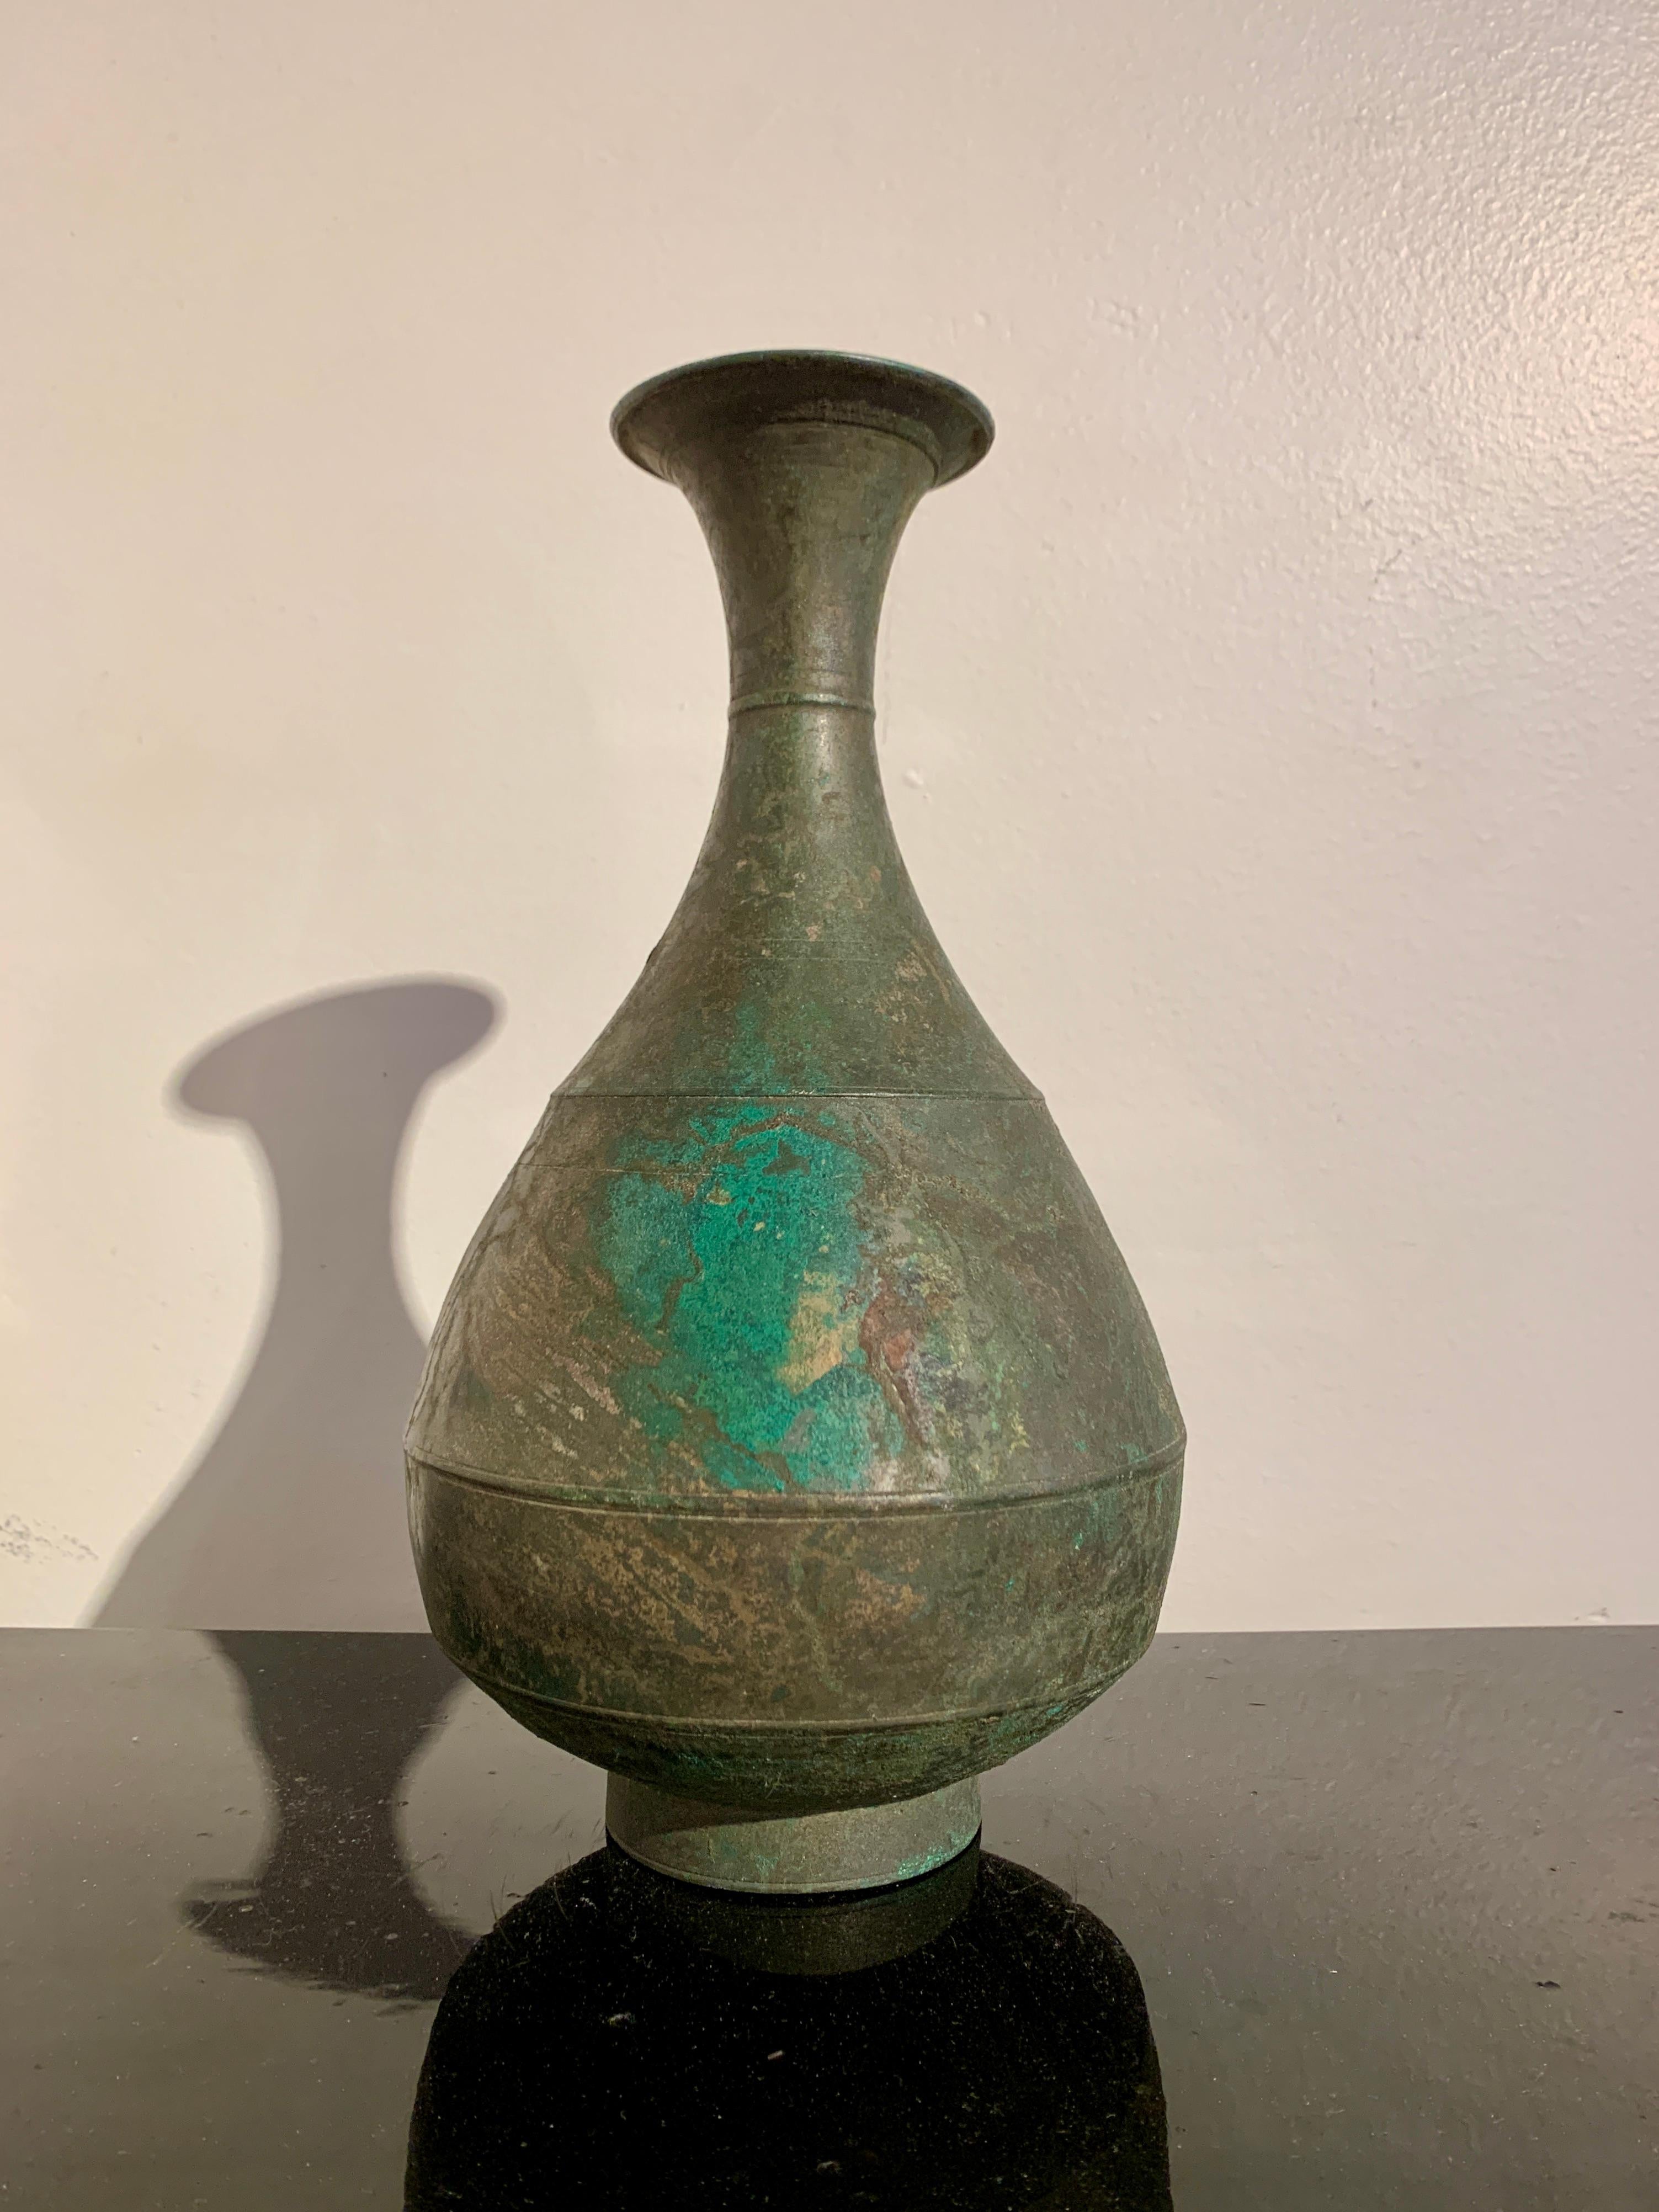 An attractive Korean Goryeo Dynasty bronze bottle vase with traces of gilding, 11th - 12th century, Korea.

The vase of typical form, with a short recessed foot supporting a pear shaped body, tall neck, and wide, everted mouth. The bronze with an